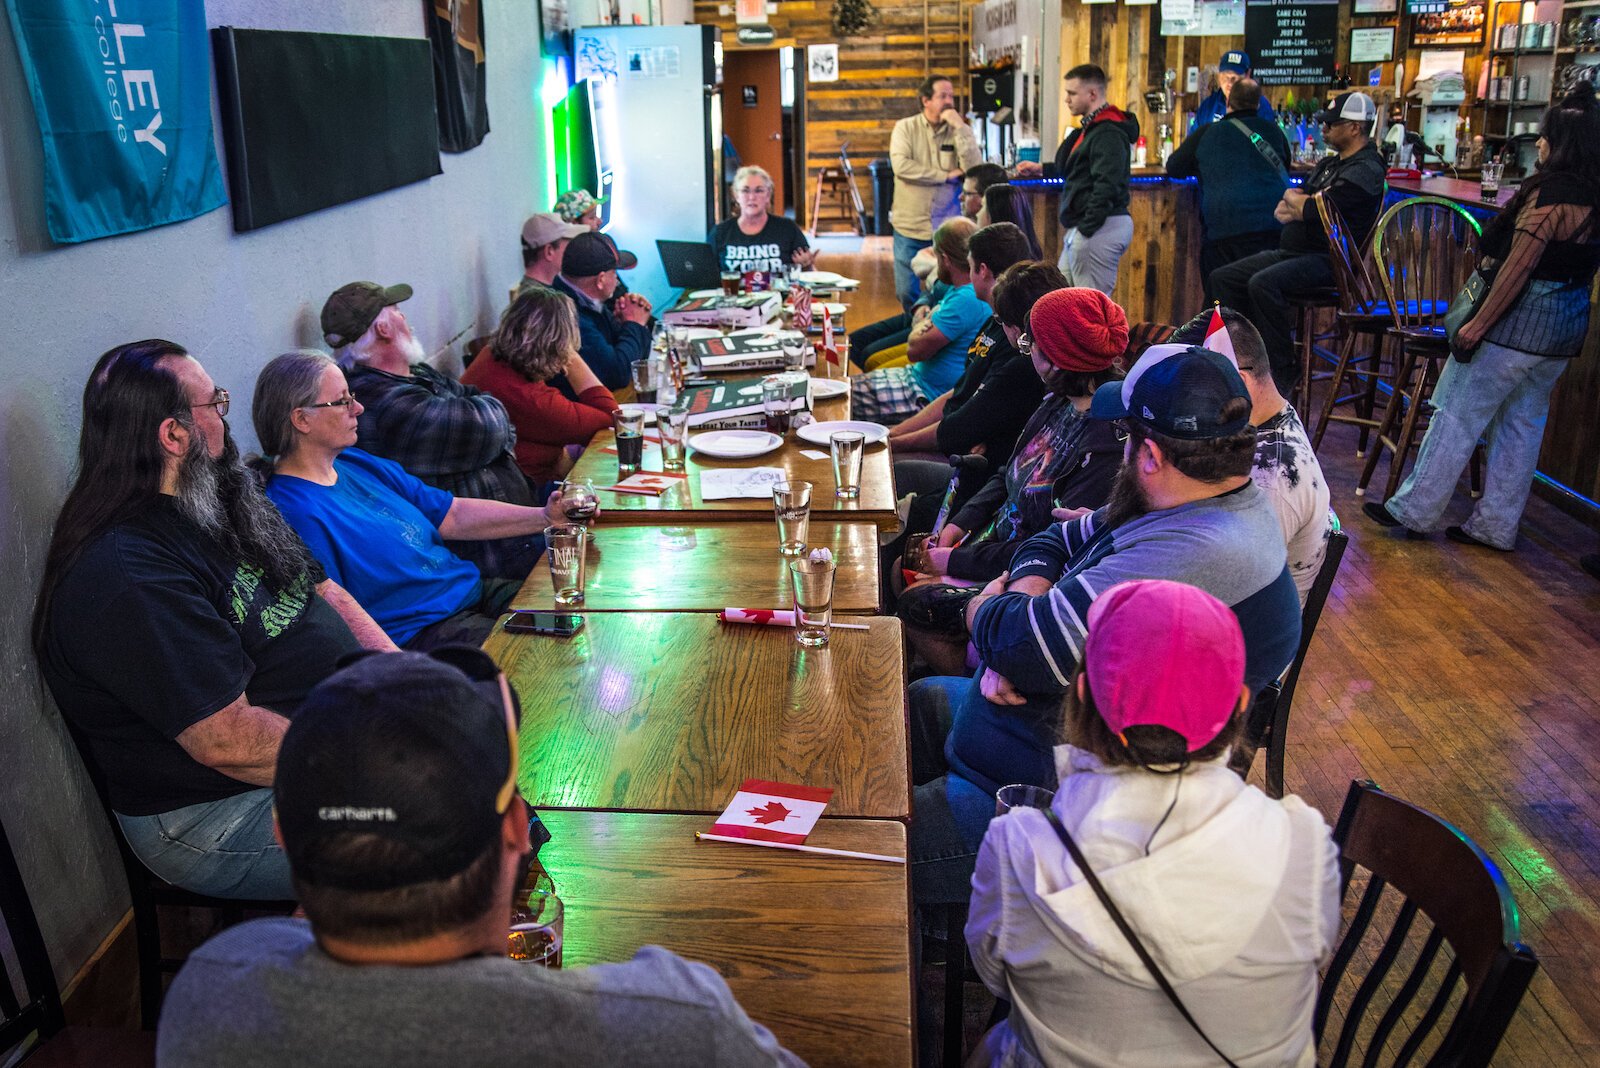 The first ever Canuck Club meeting took place at Final Gravity in April.